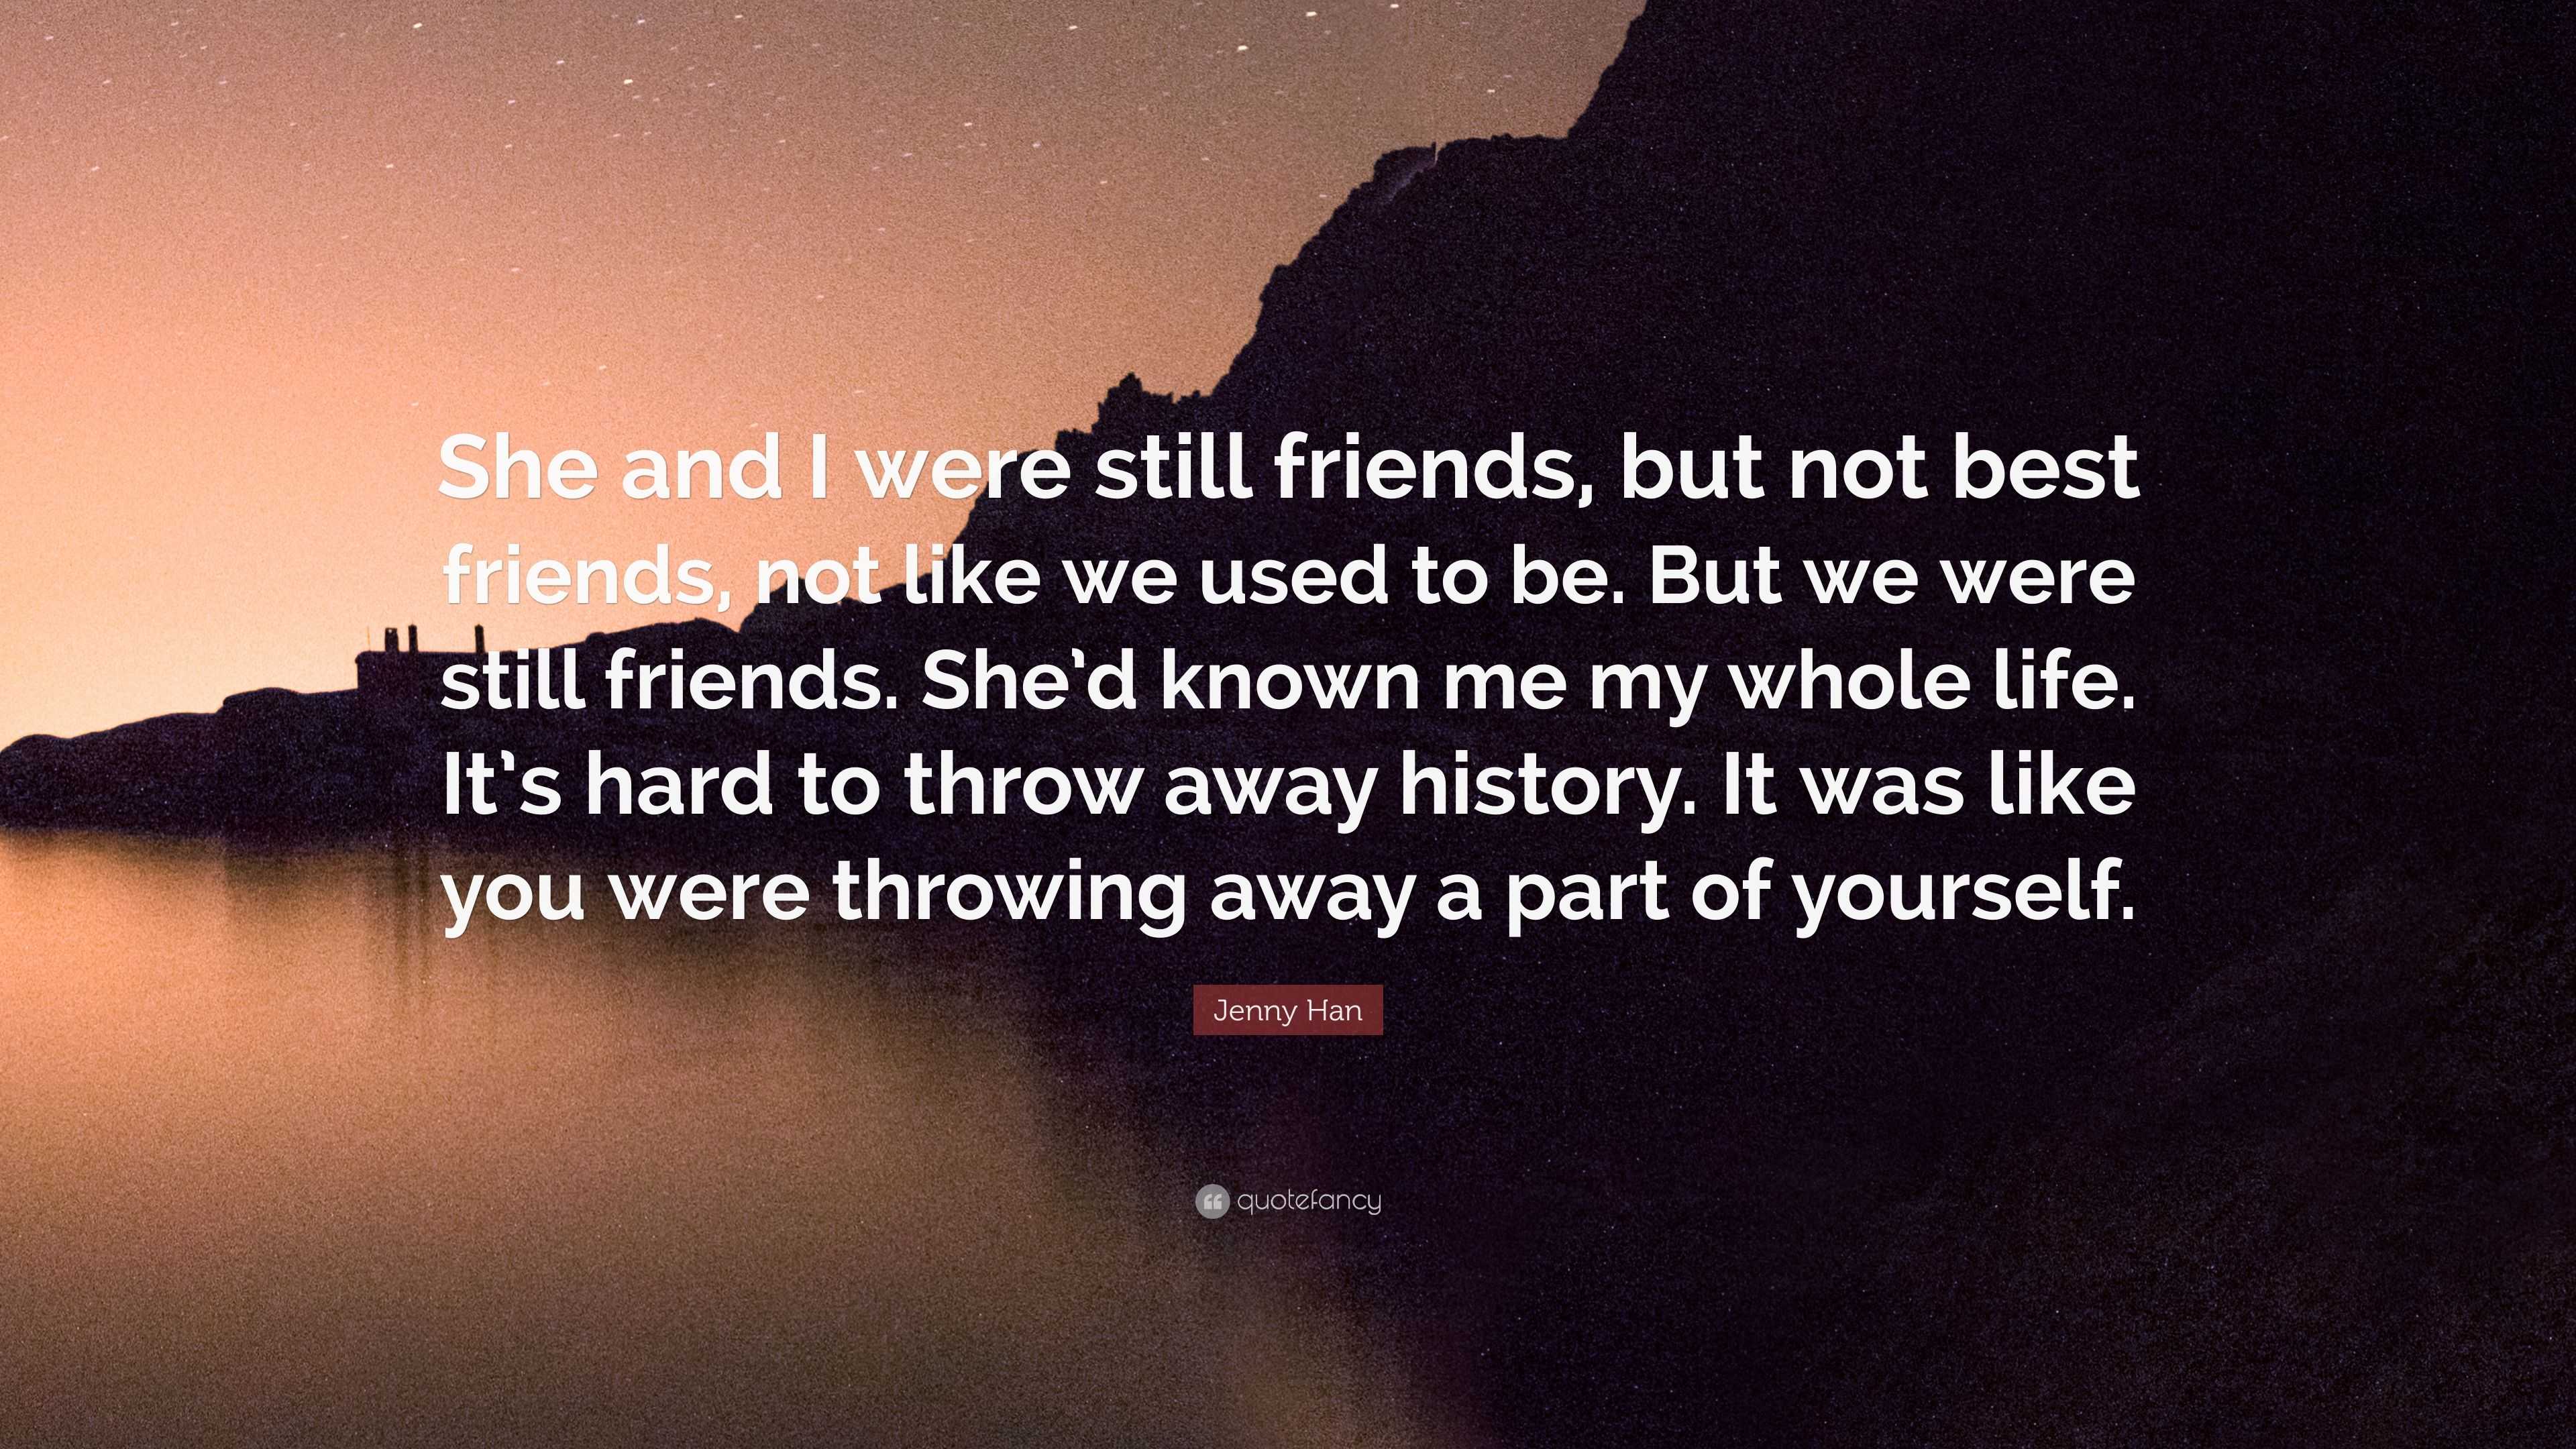 Jenny Han Quote “She and I were still friends but not best friends